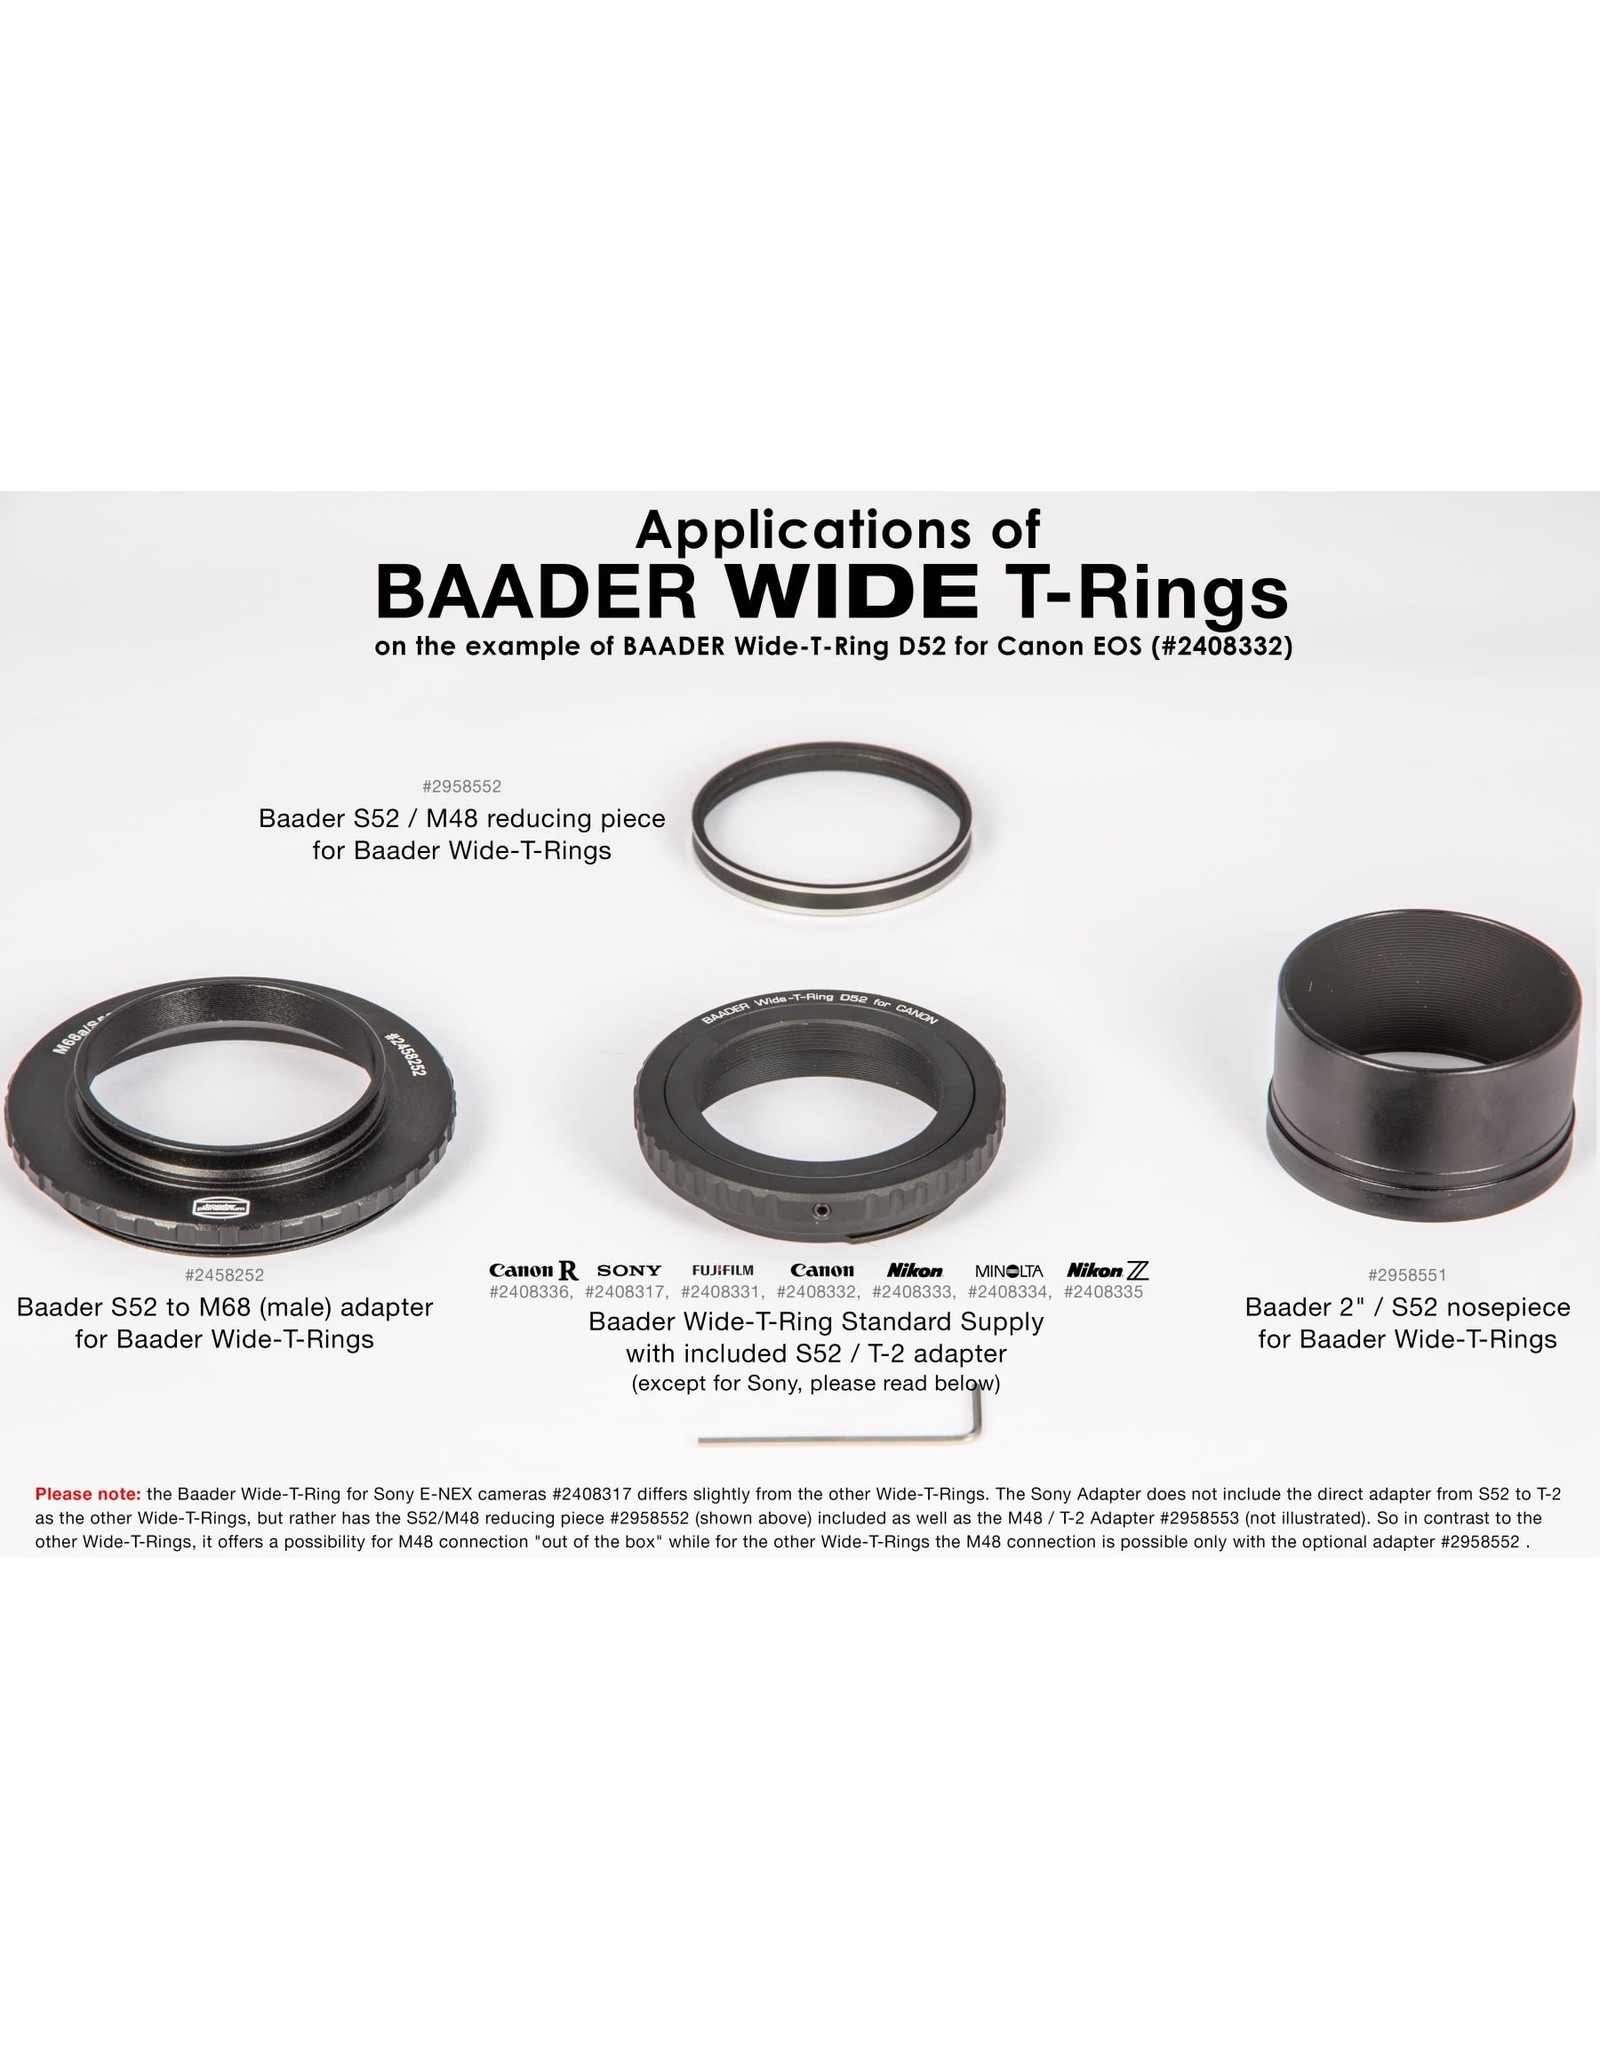 Baader Planetarium Baader Wide-T-Ring Nikon with D52i to T-2 and S52